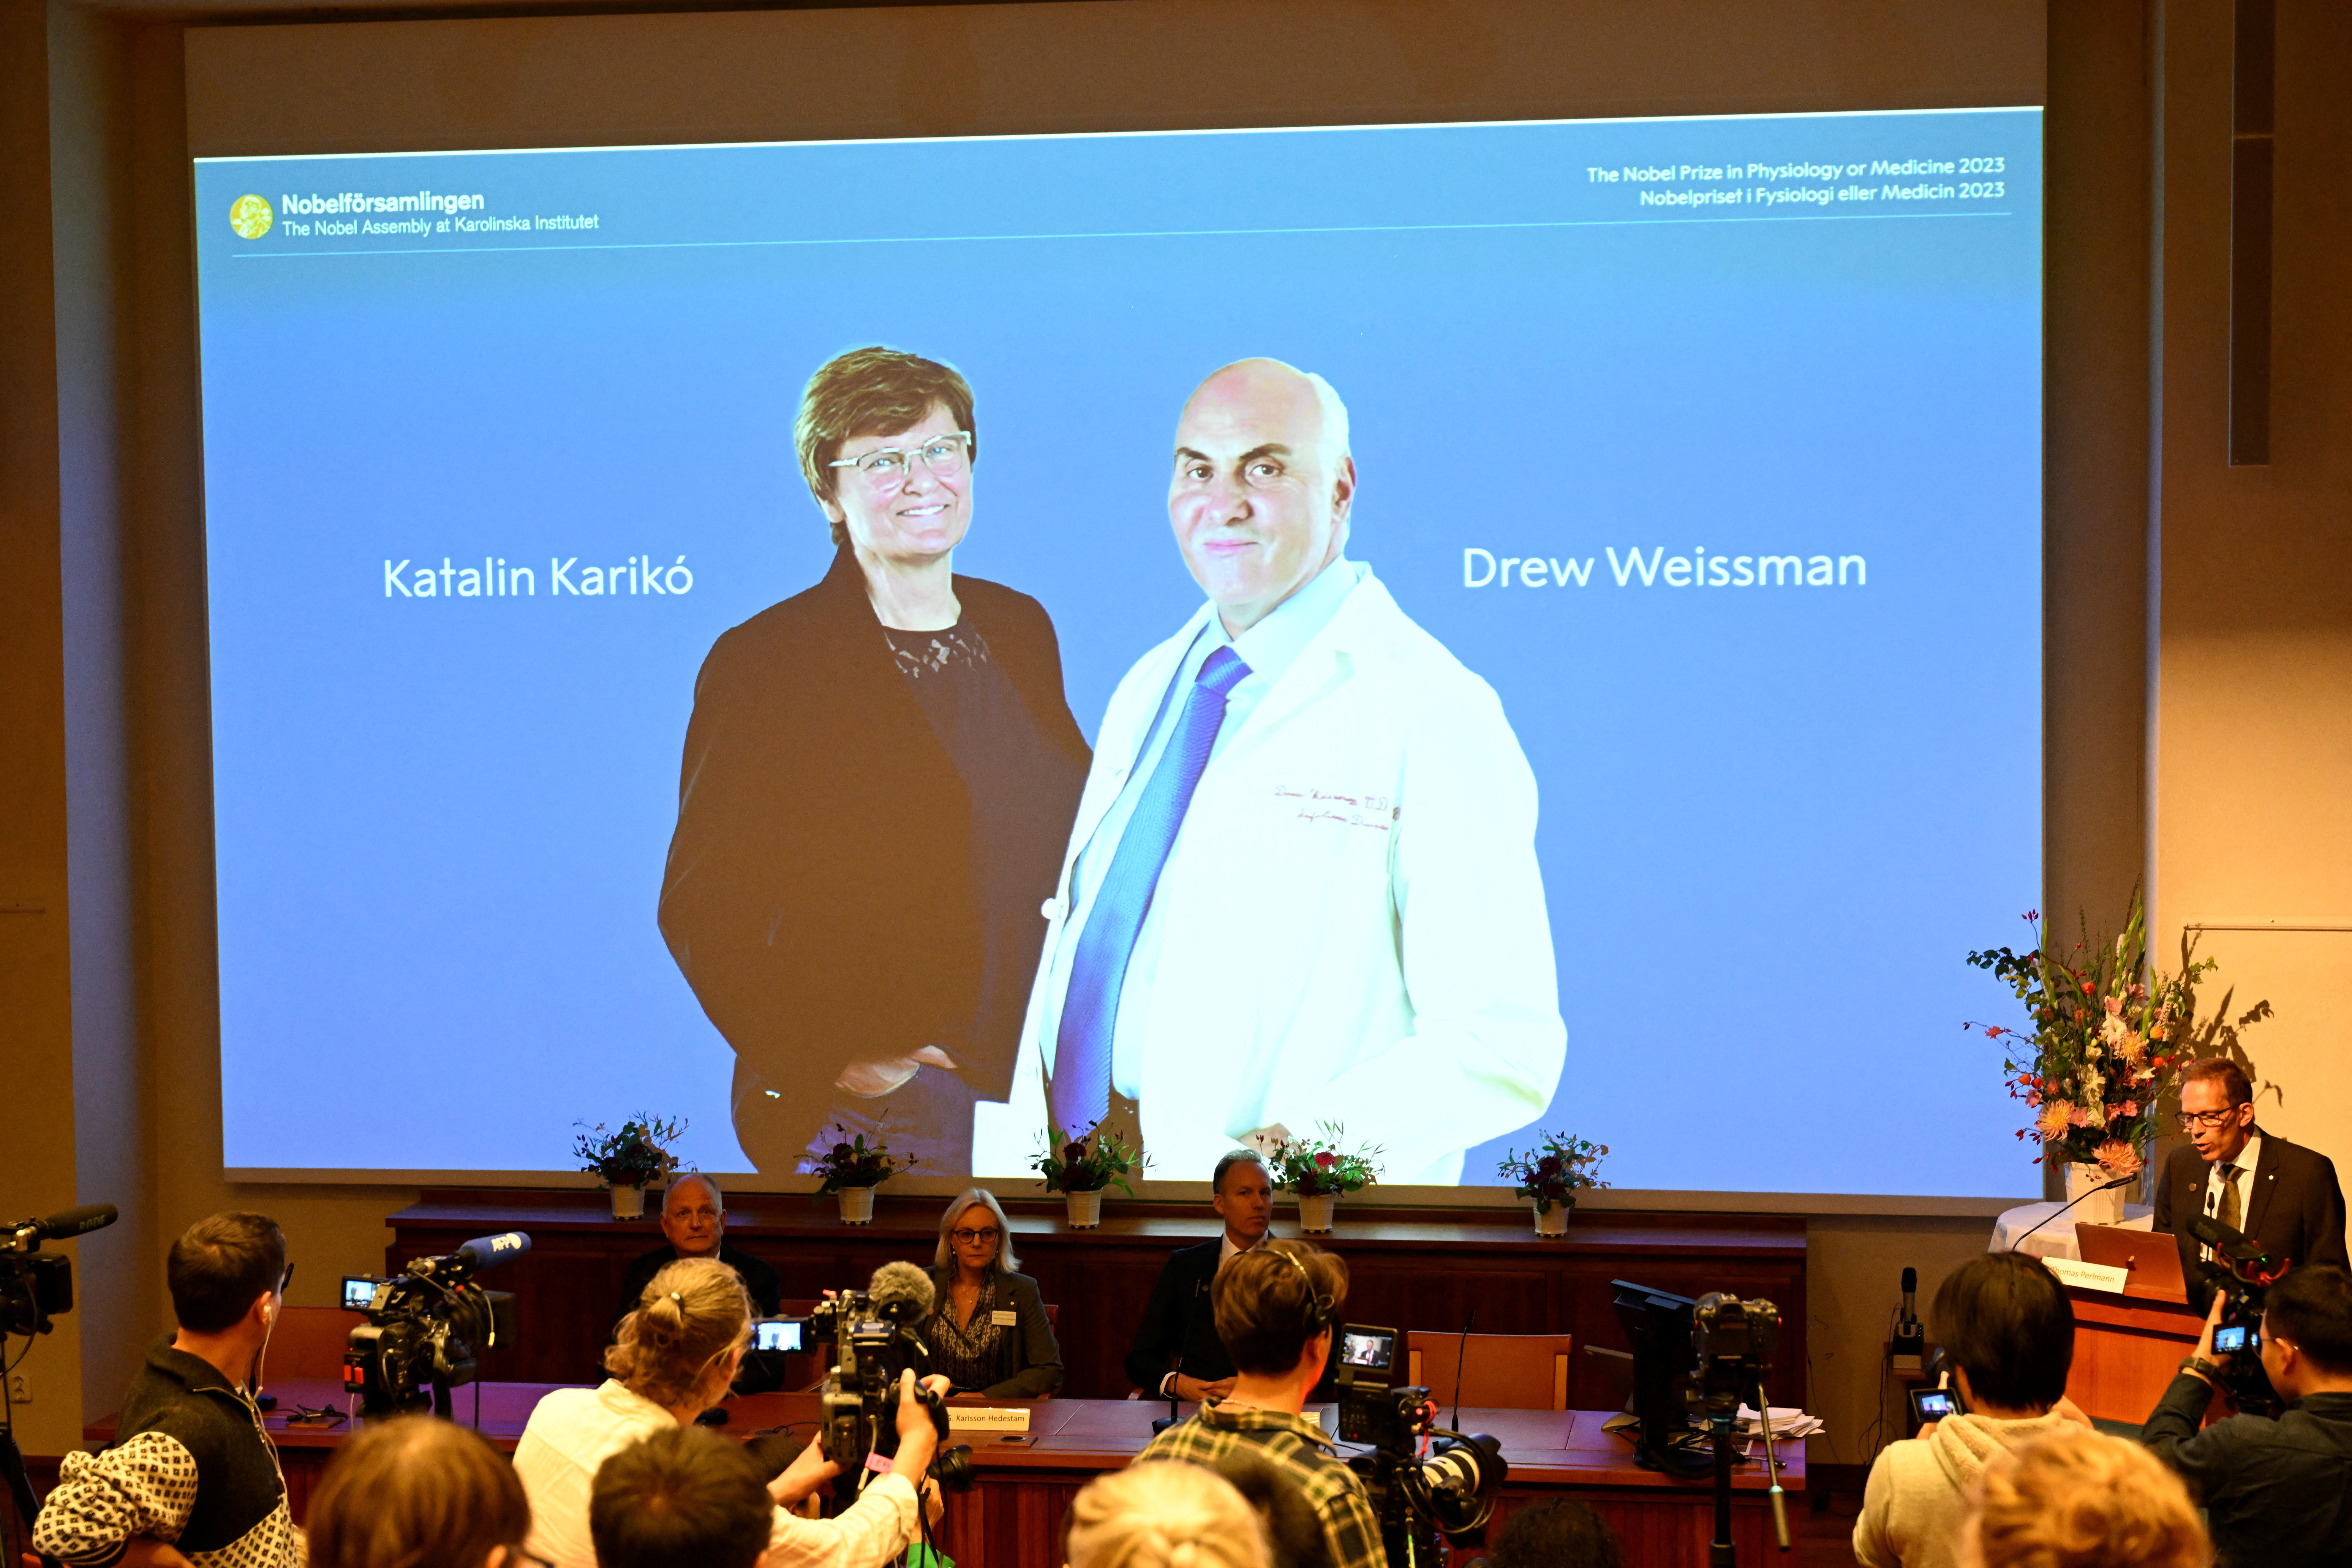 Katalin Kariko and Drew Weissman win the 2023 Nobel Prize in Physiology or Medicine in Stockholm